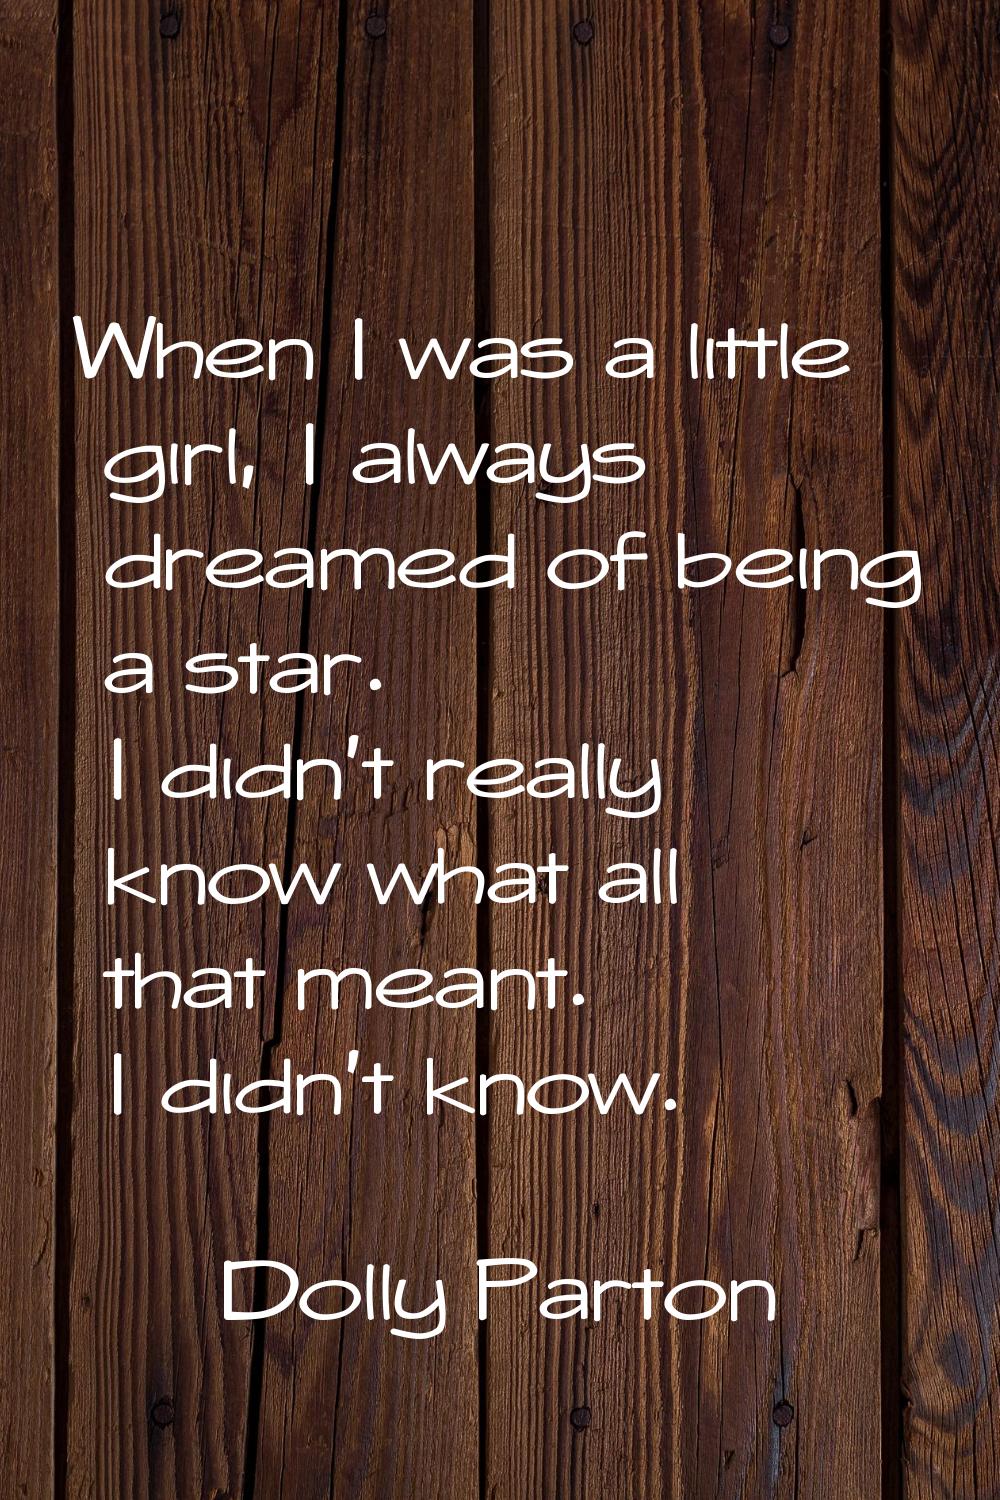 When I was a little girl, I always dreamed of being a star. I didn't really know what all that mean